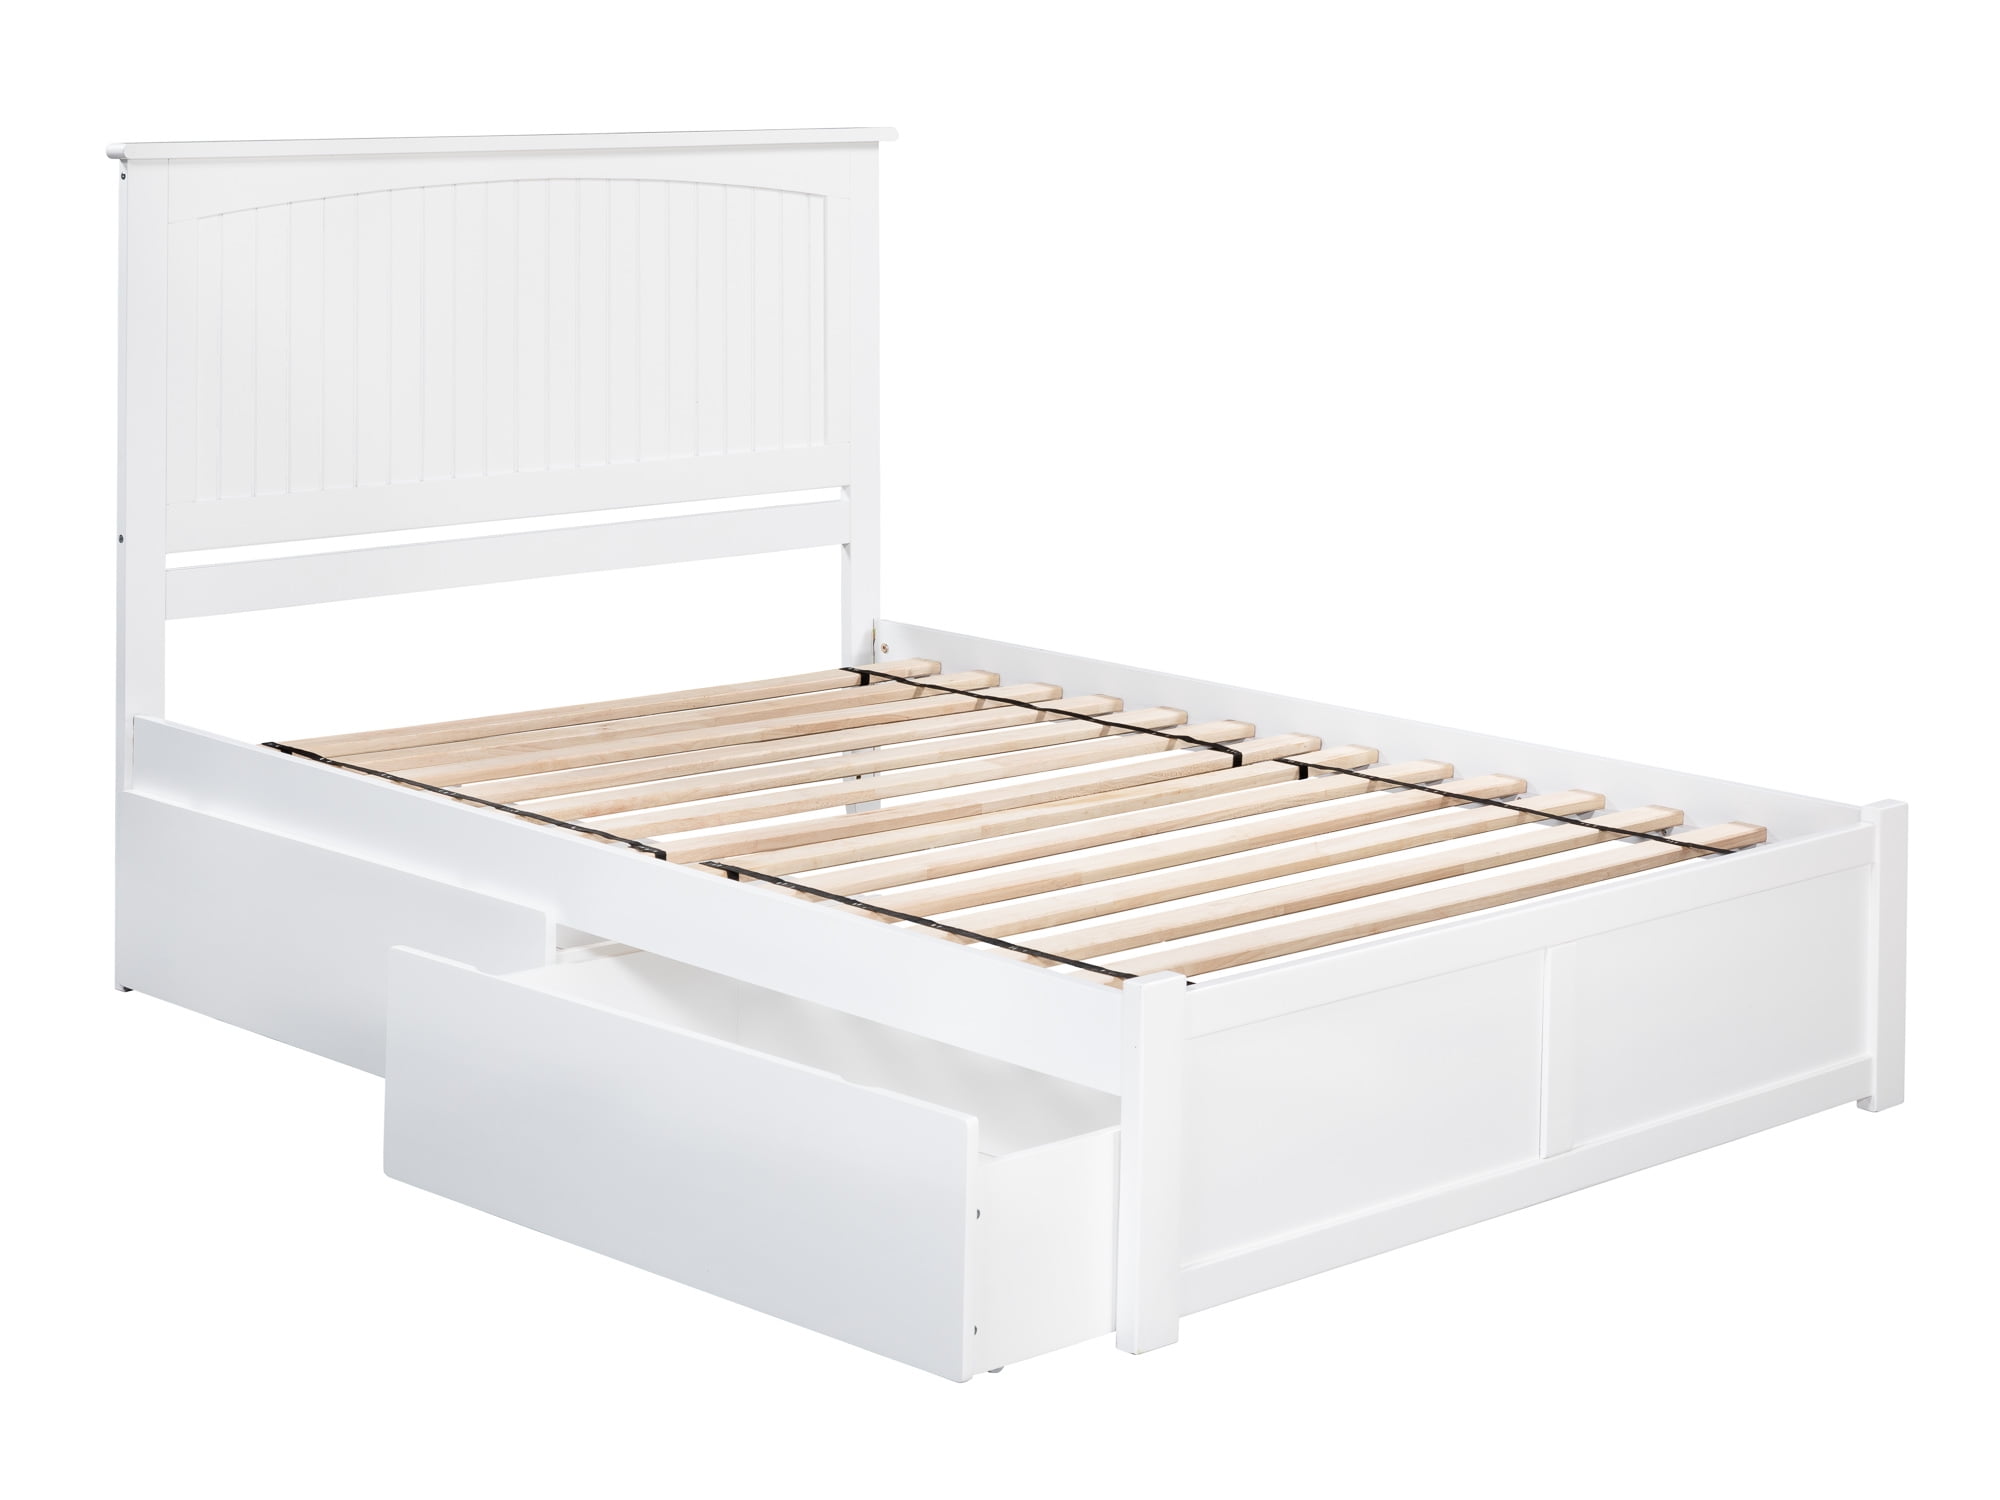 Picture of Atlantic Furniture AR8242112 Nantucket Panel Footboard & Urban Bed Drawers, White - Queen